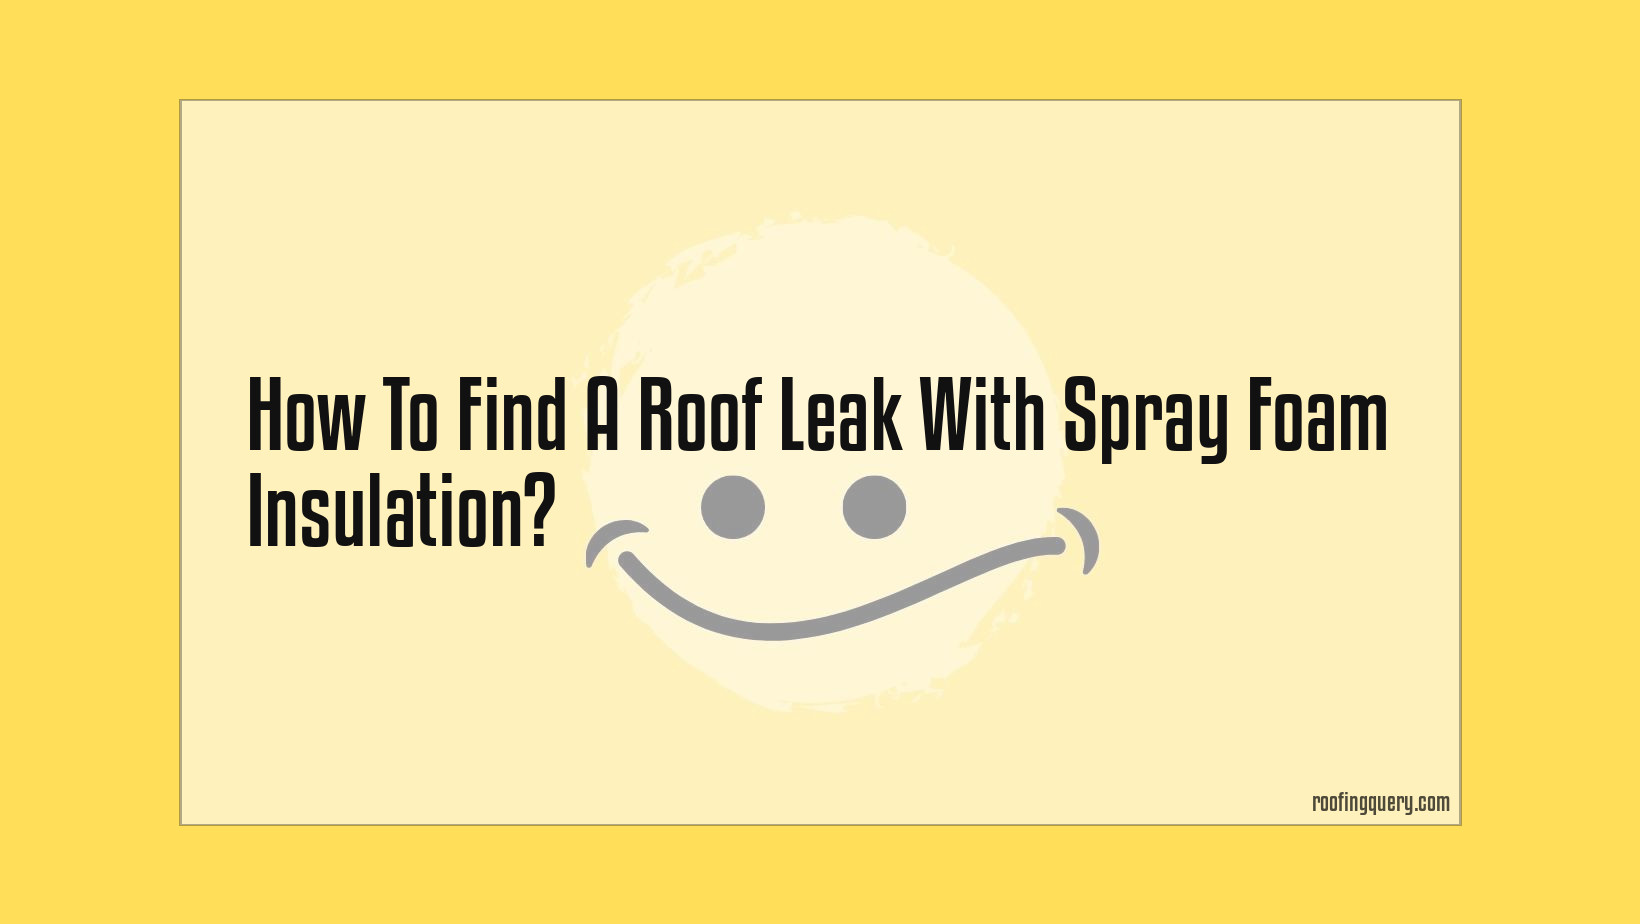 How To Find A Roof Leak With Spray Foam Insulation